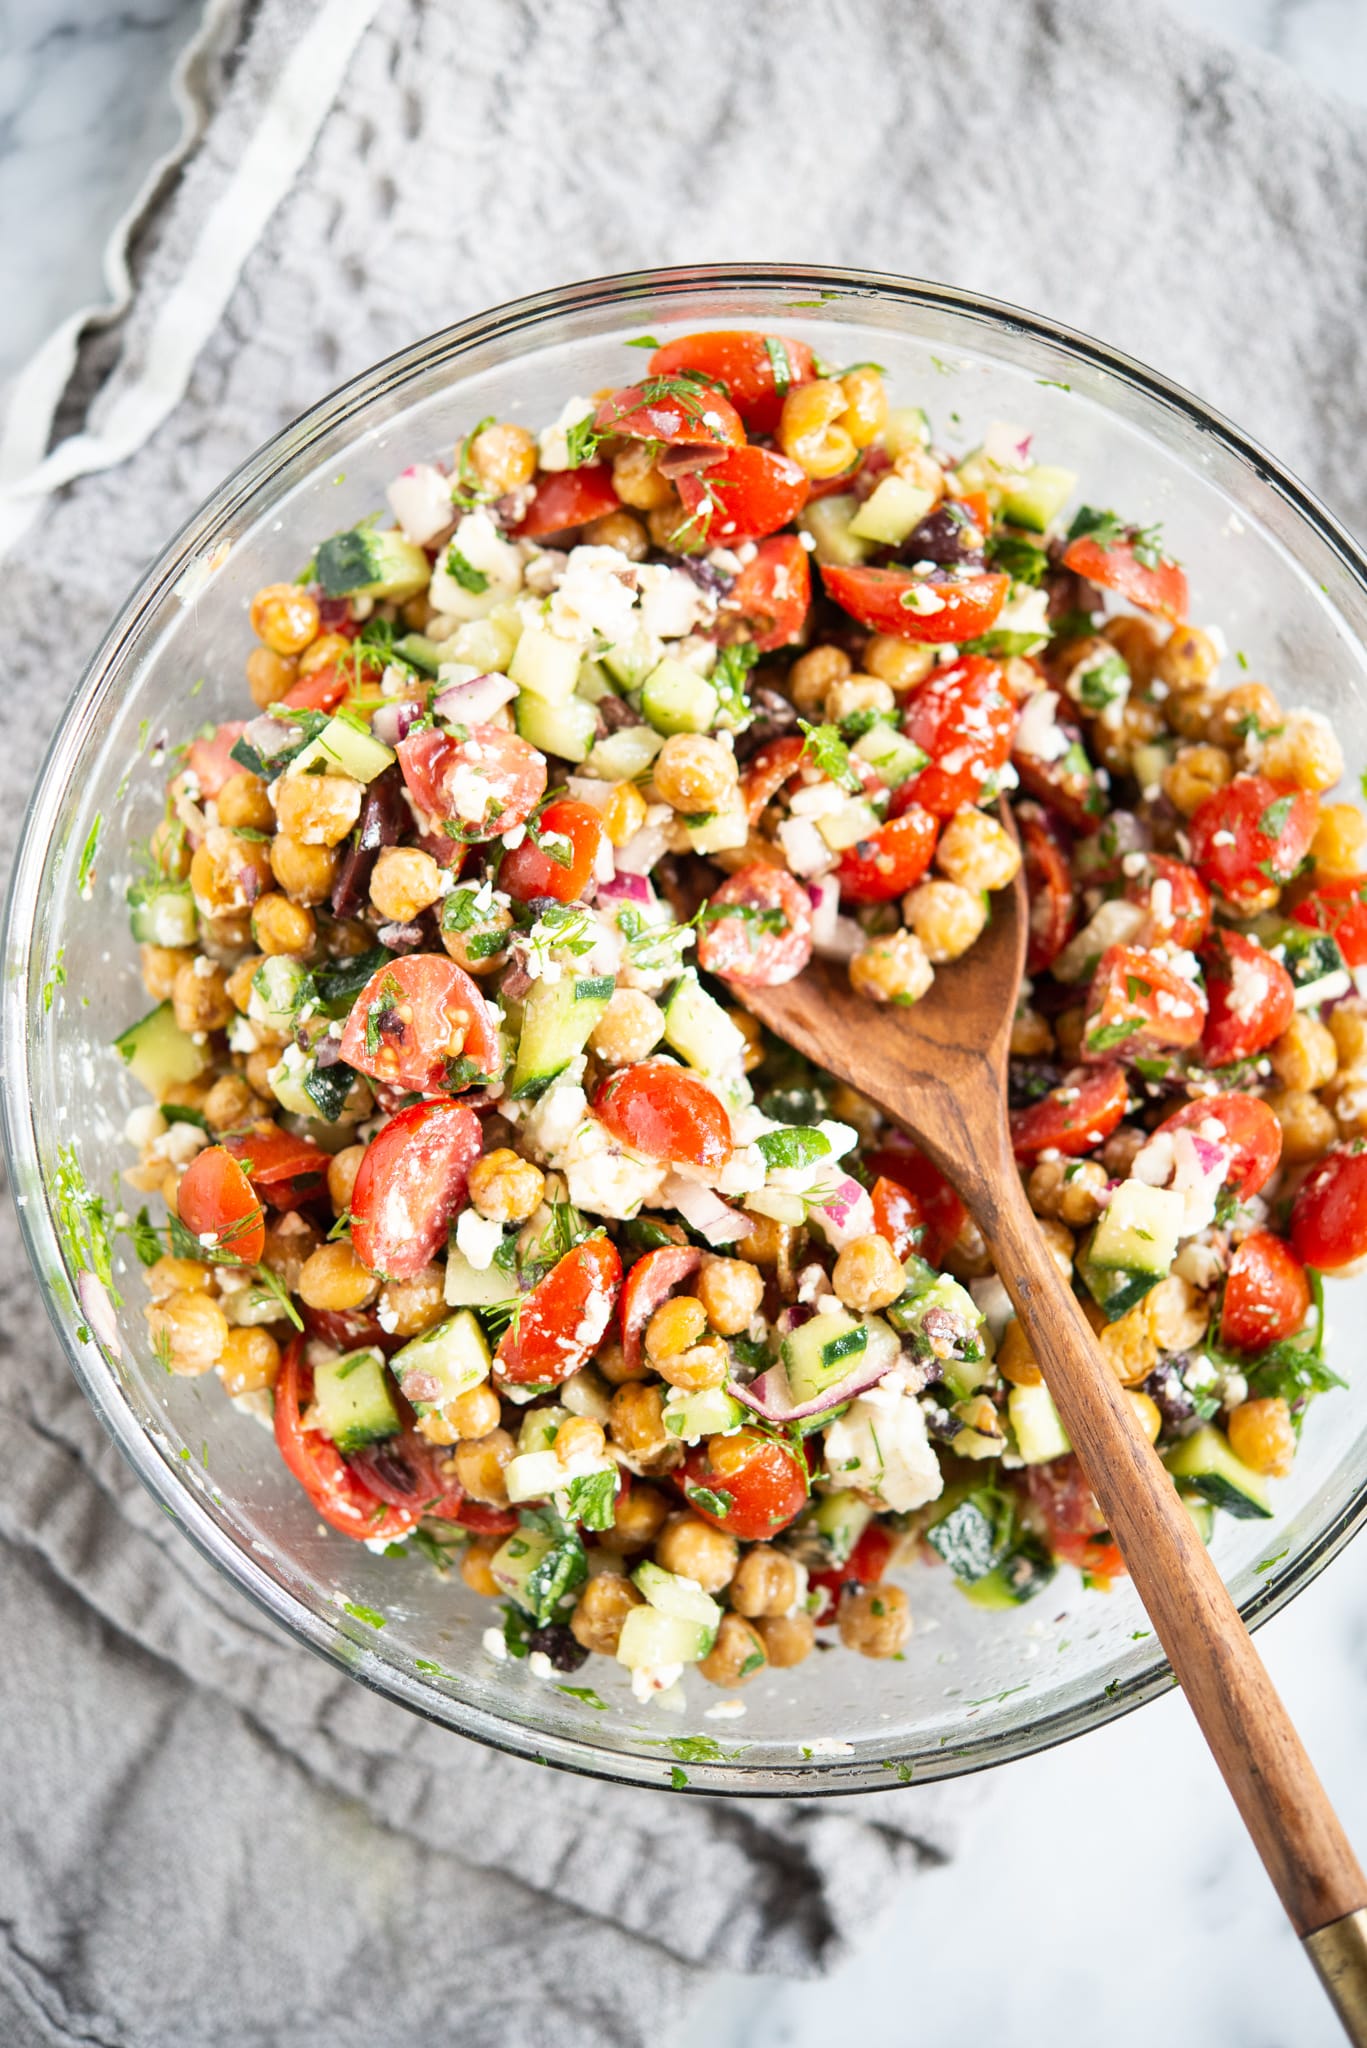 mediterranean chickpea salad - chickpeas, feta cheese, tomatoes, and cucumber - in a glass bowl on a marble surface with a wooden spoon inside